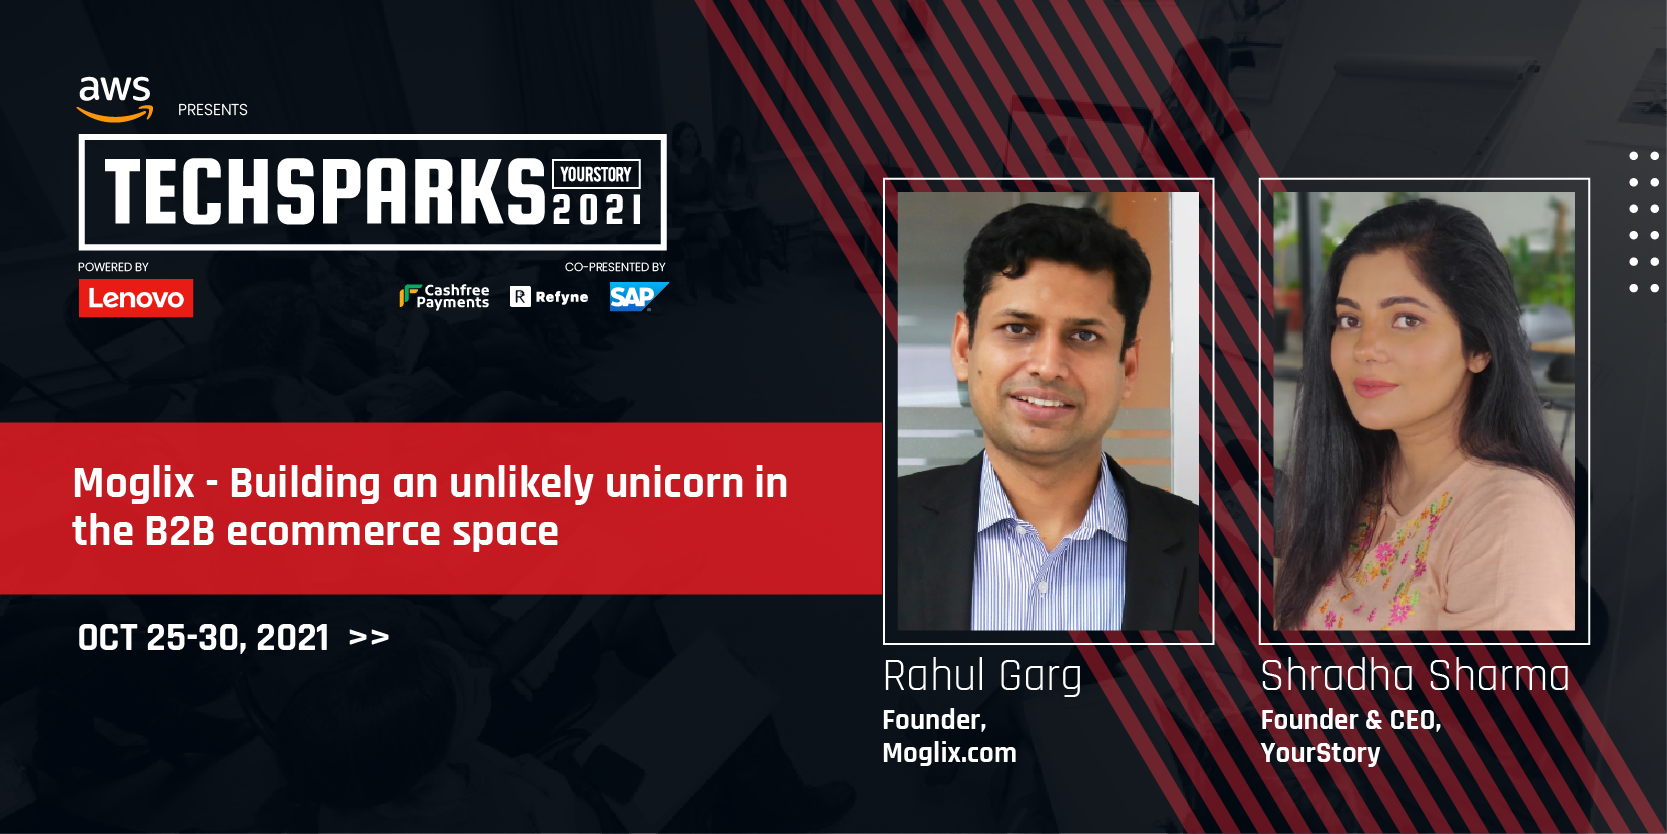 Indian startups are inspiring global opportunities, says Rahul Garg of Moglix
